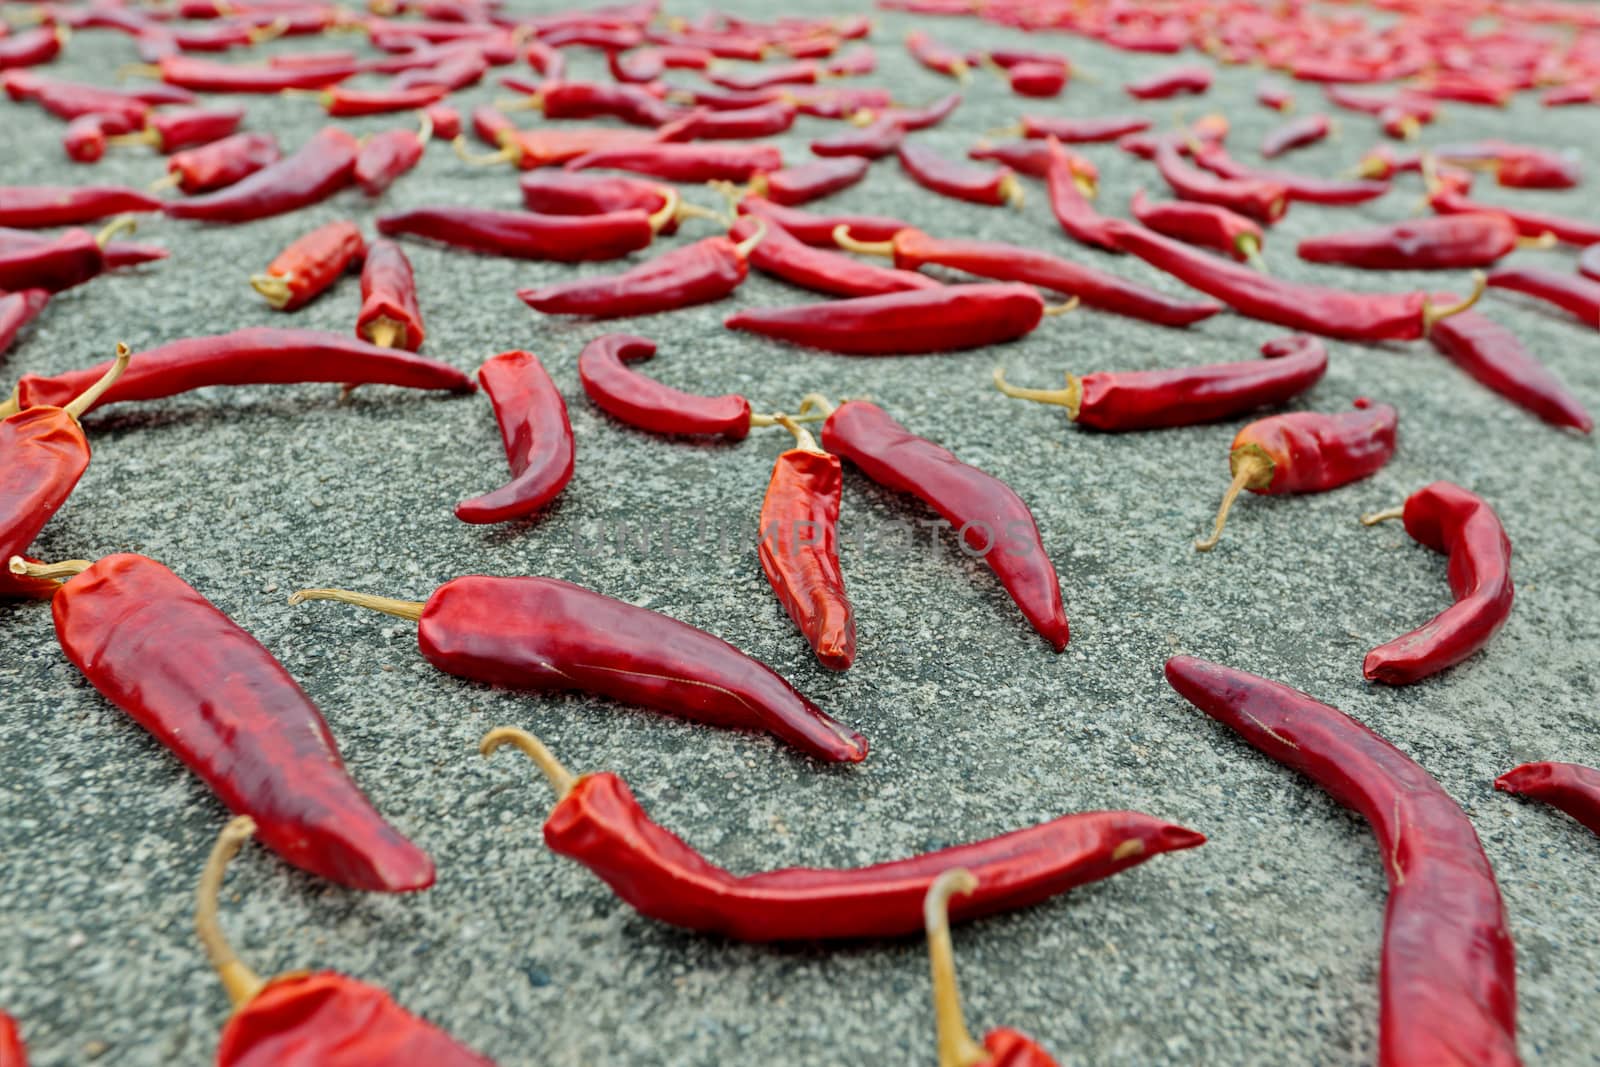 Many chili peppers drying on the ground by dsmsoft